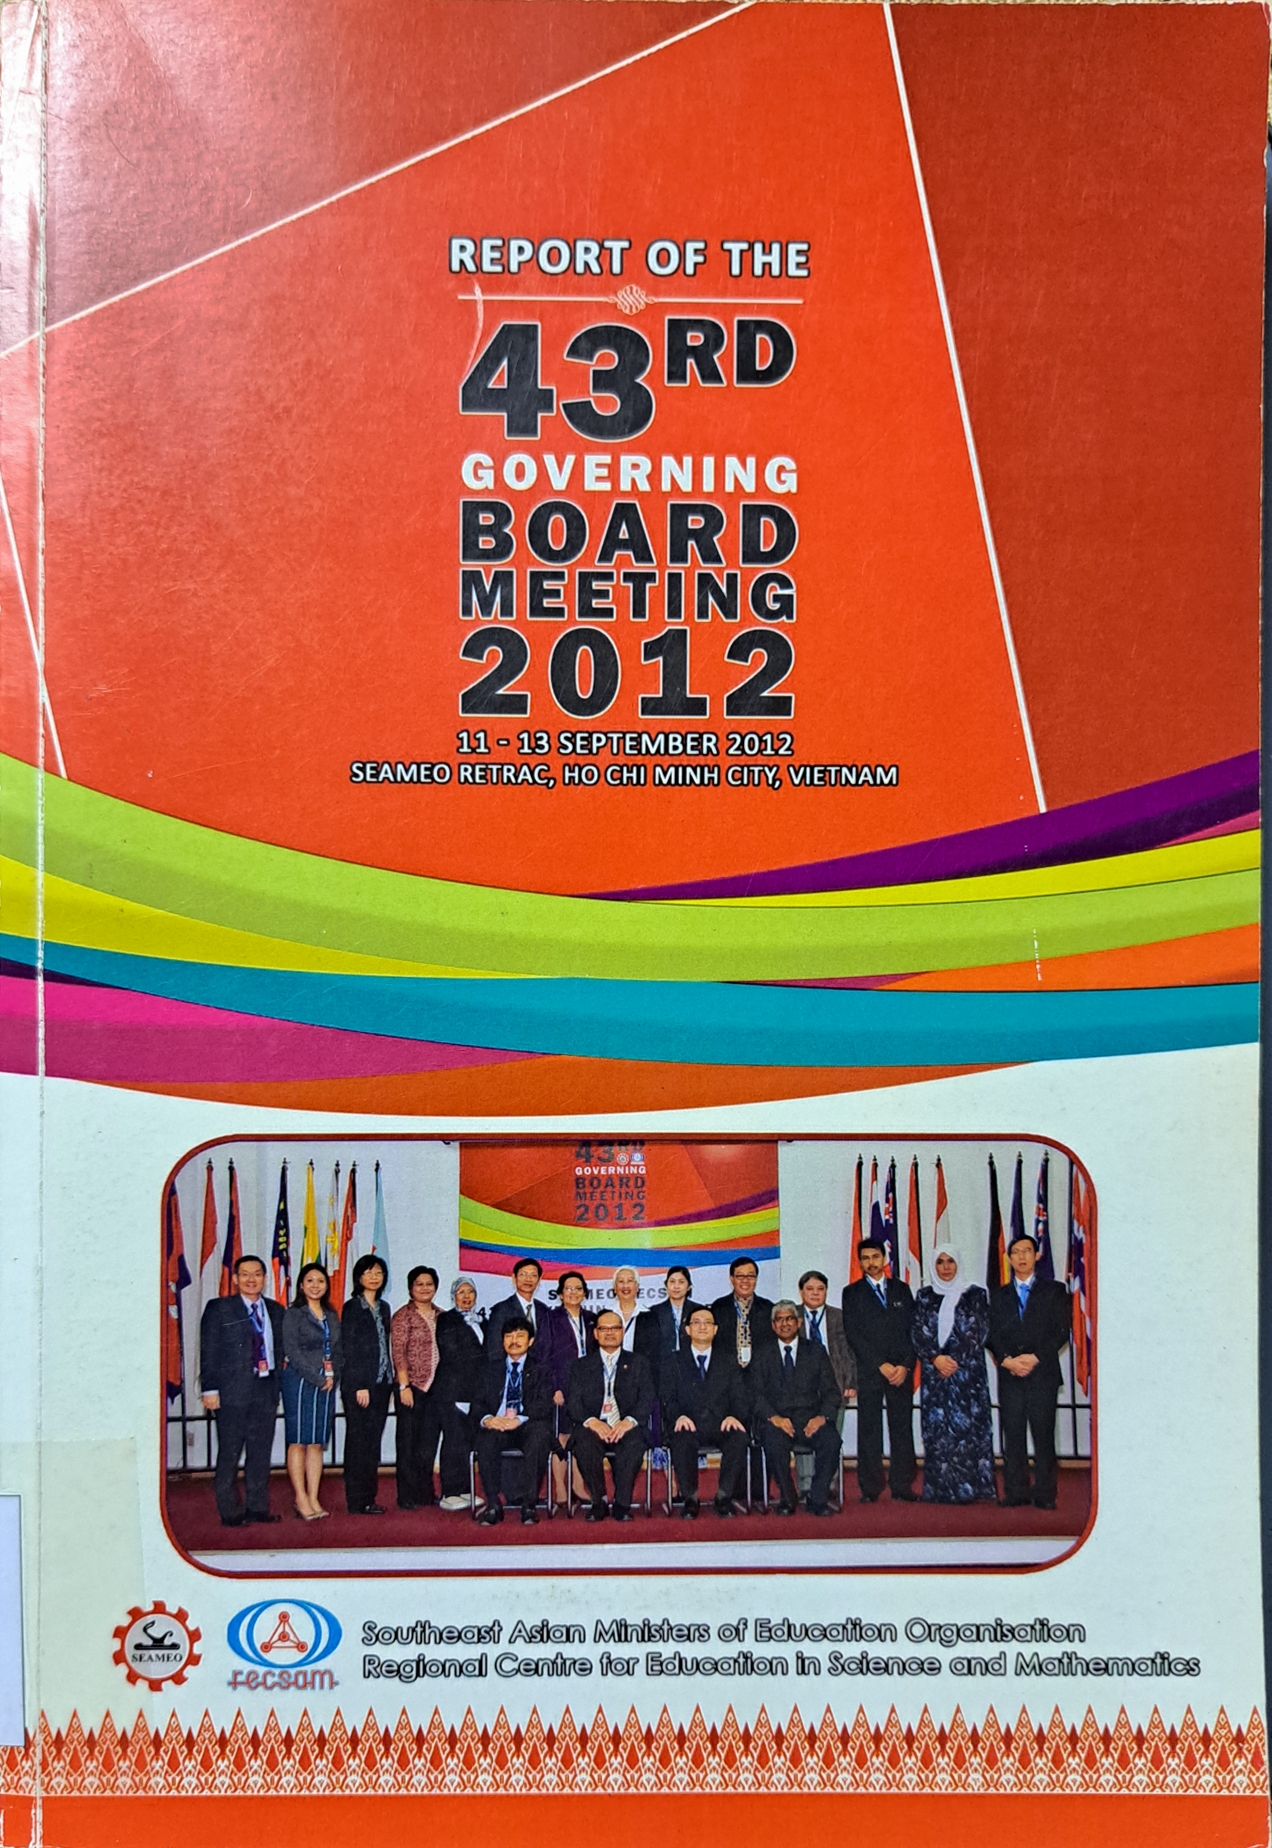 Cover image for 43rd Report of SEAMEO SEN Governing Board Meeting 2012 bibliographic